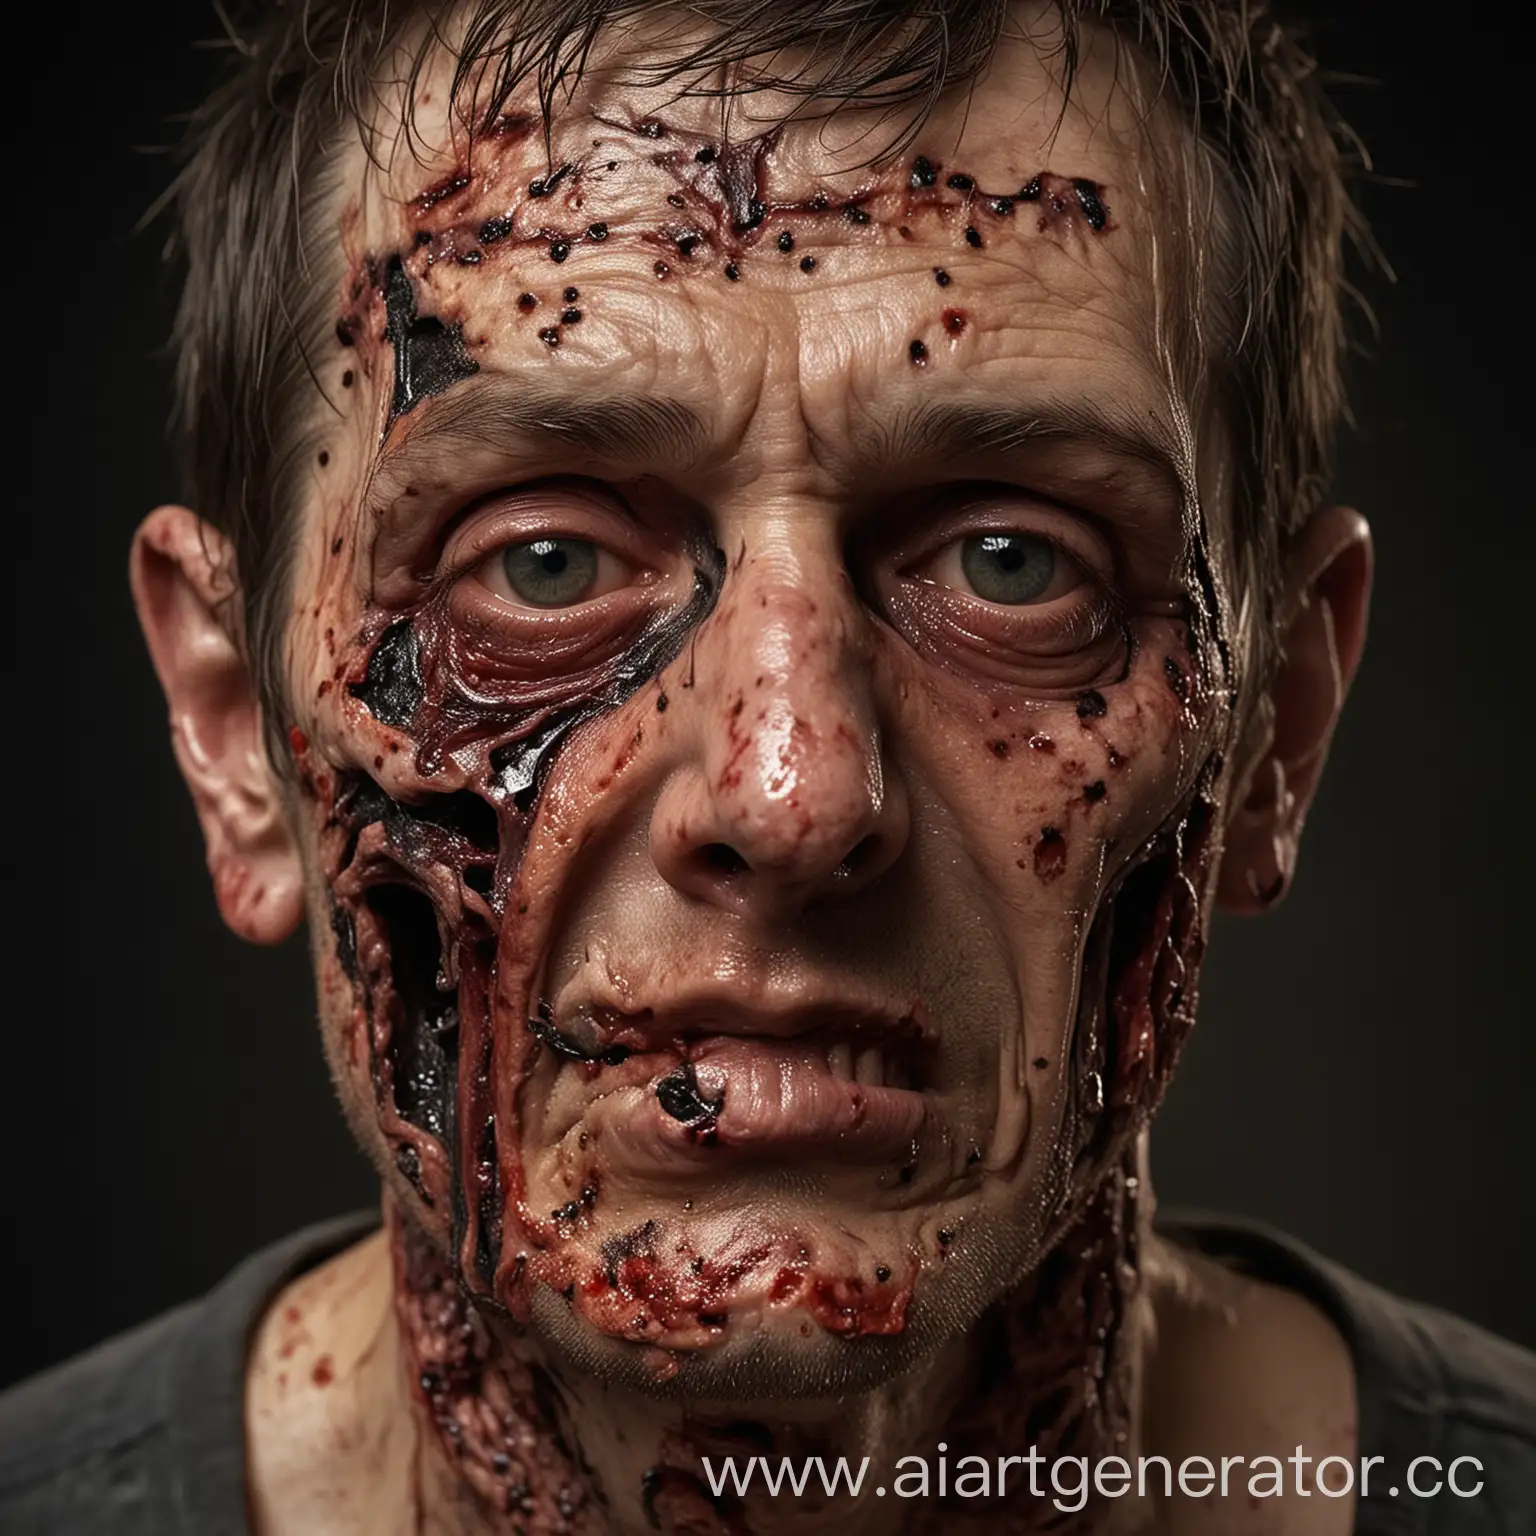 ZombieLike-Man-with-Disfigured-Face-Covered-in-Blisters-and-Burns